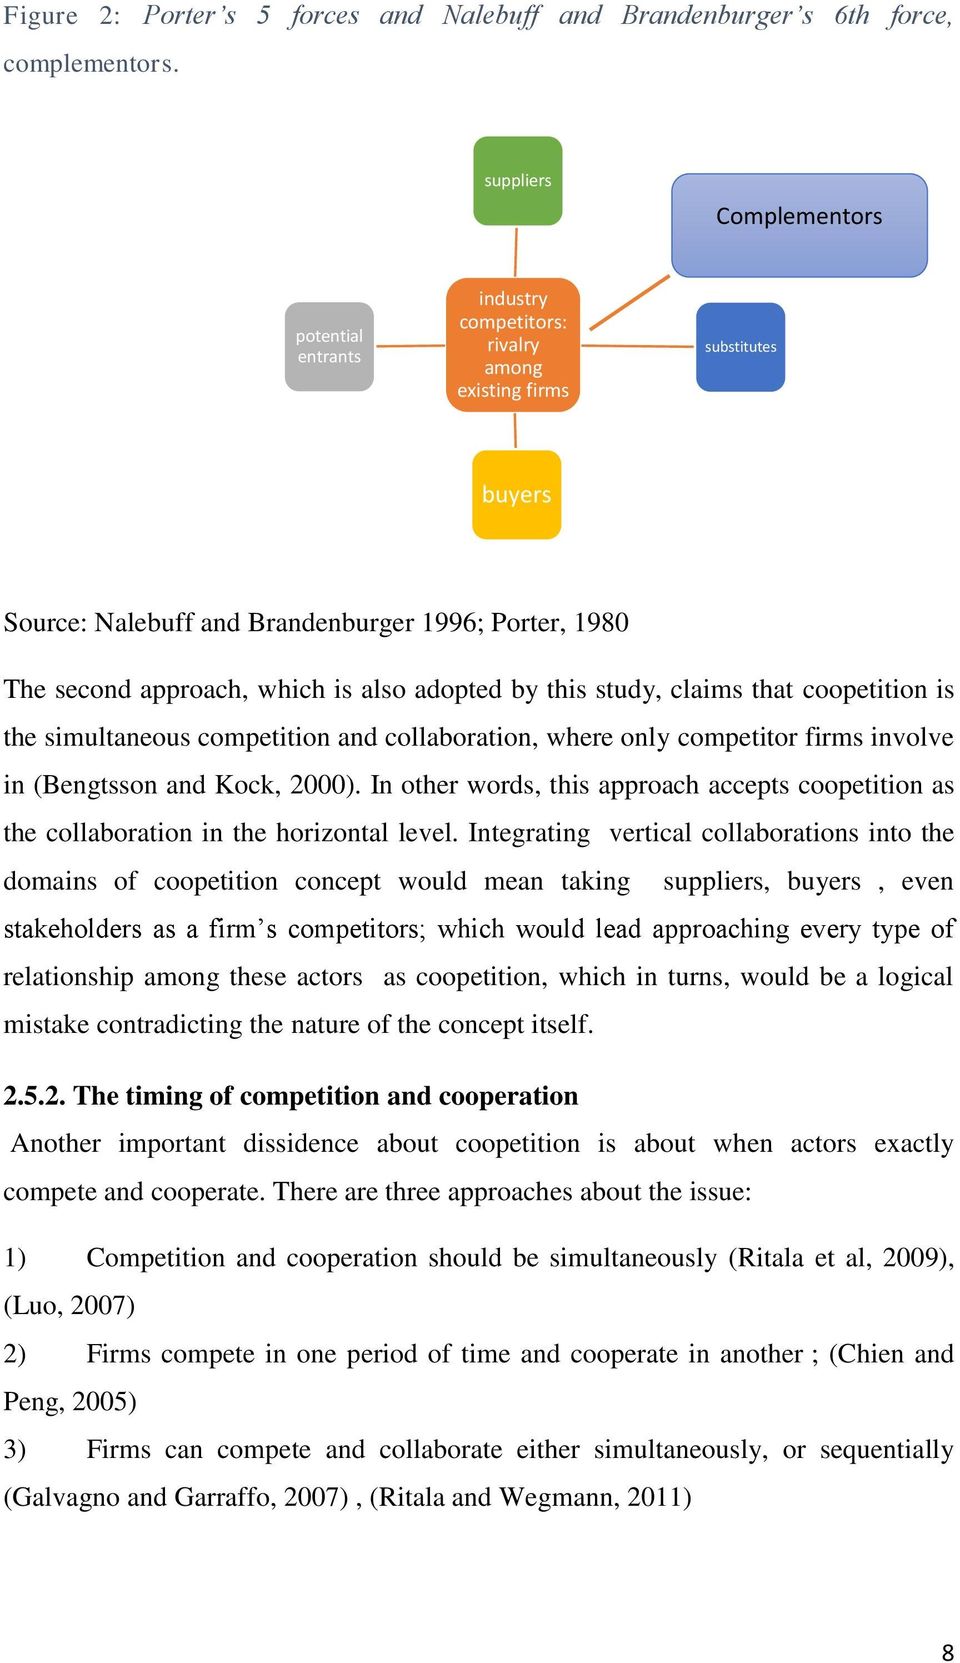 also adopted by this study, claims that coopetition is the simultaneous competition and collaboration, where only competitor firms involve in (Bengtsson and Kock, 2000).